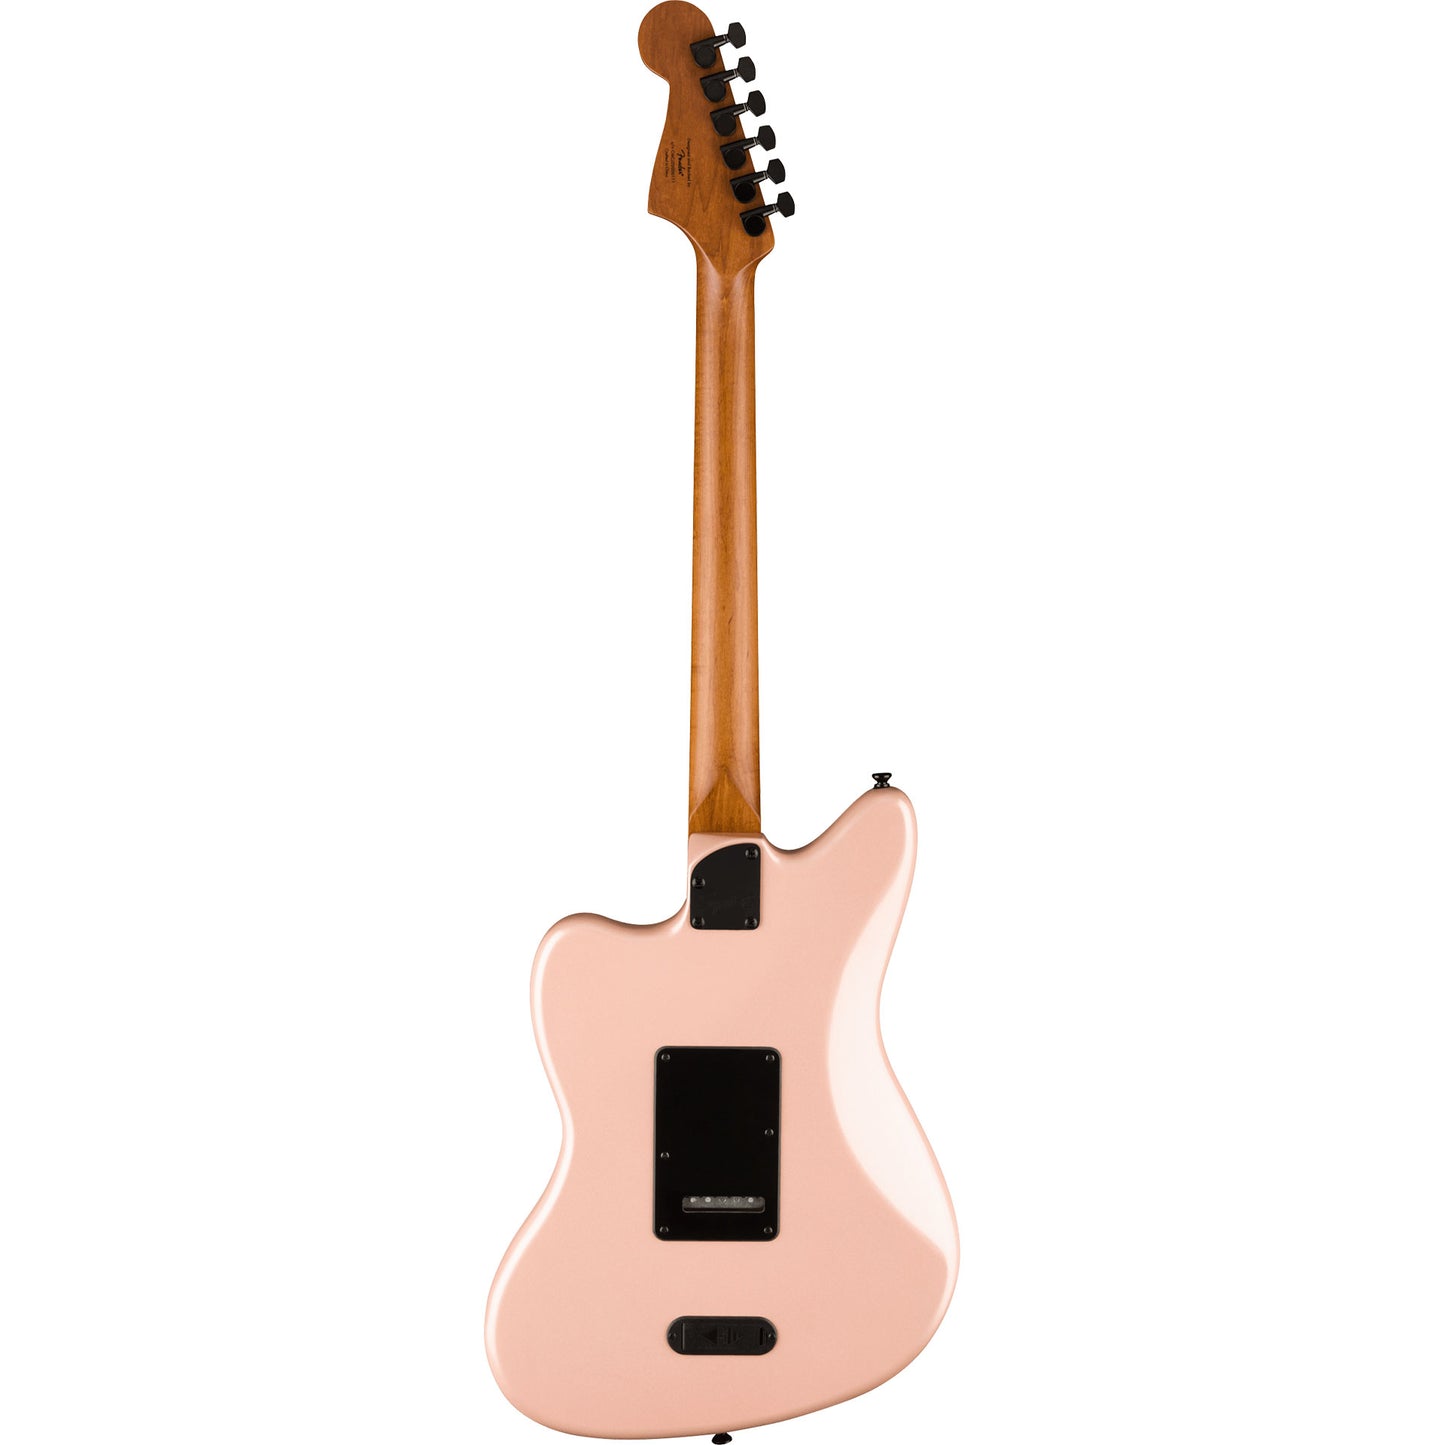 Squier Contemporary Active Jazzmaster HH Electric Guitar in Shell Pink Pearl